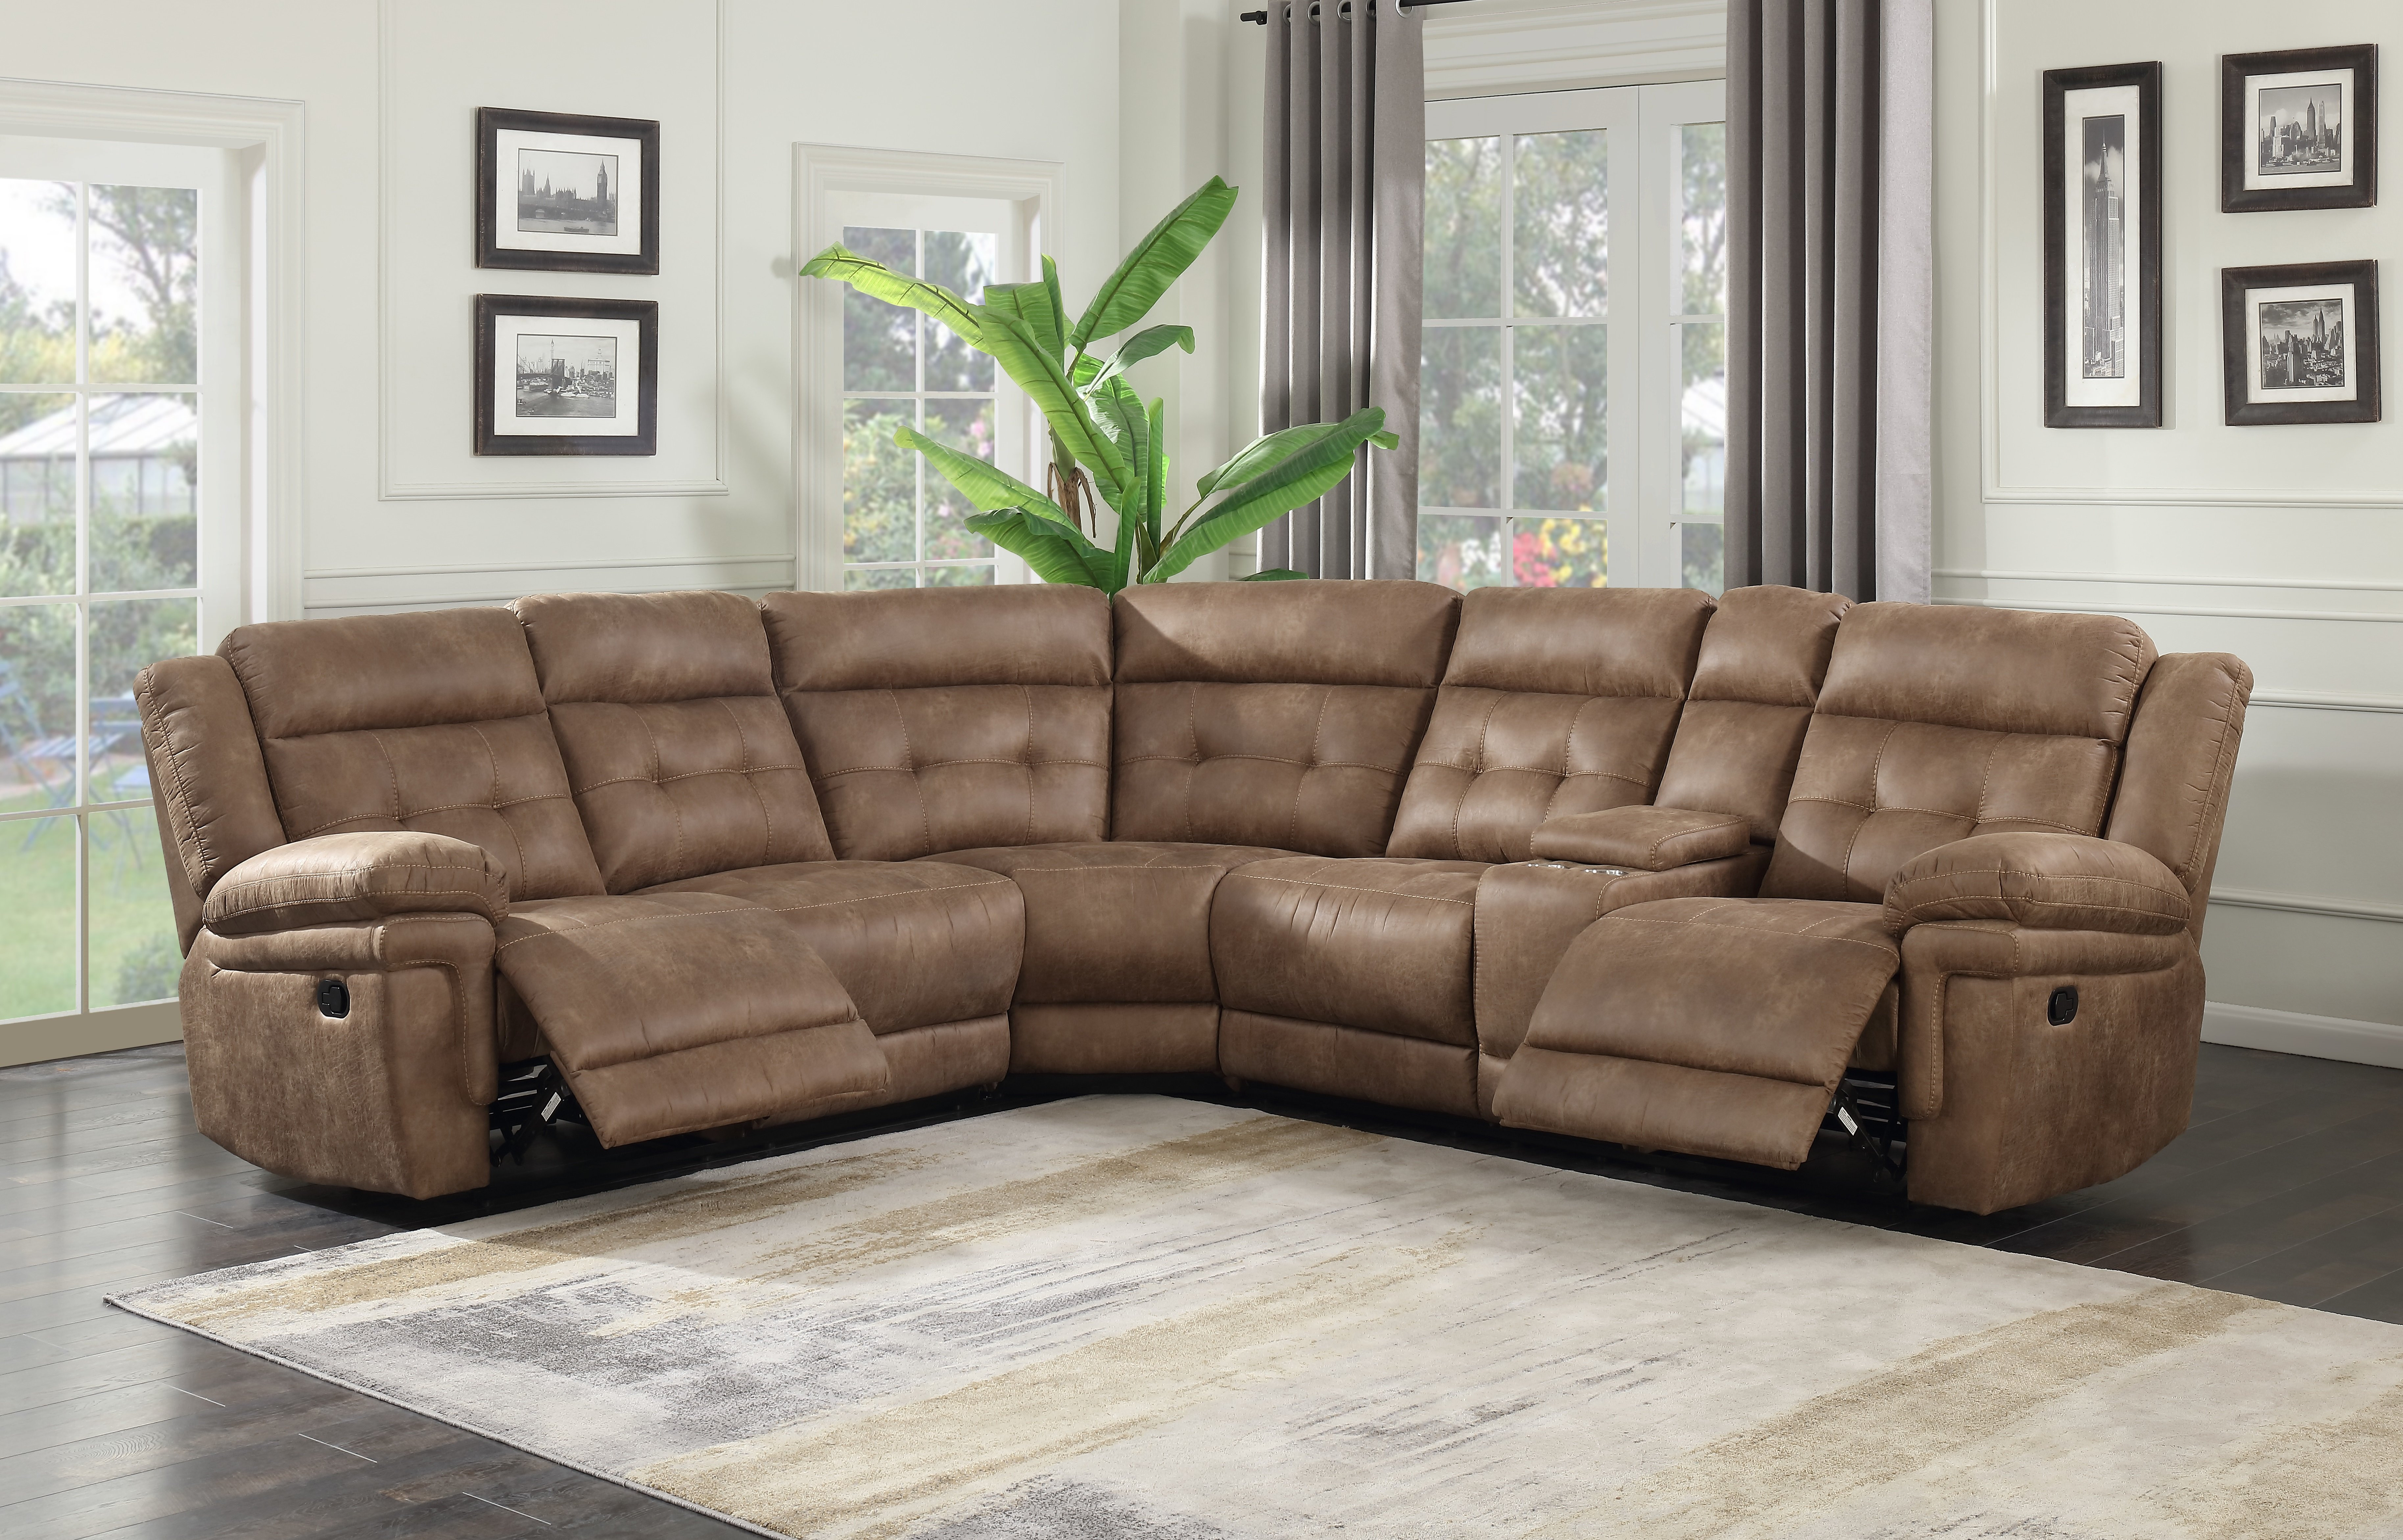 hardwood floor protectors for couch of red barrel studio rancourt reclining sectional reviews wayfair throughout rancourt reclining sectional